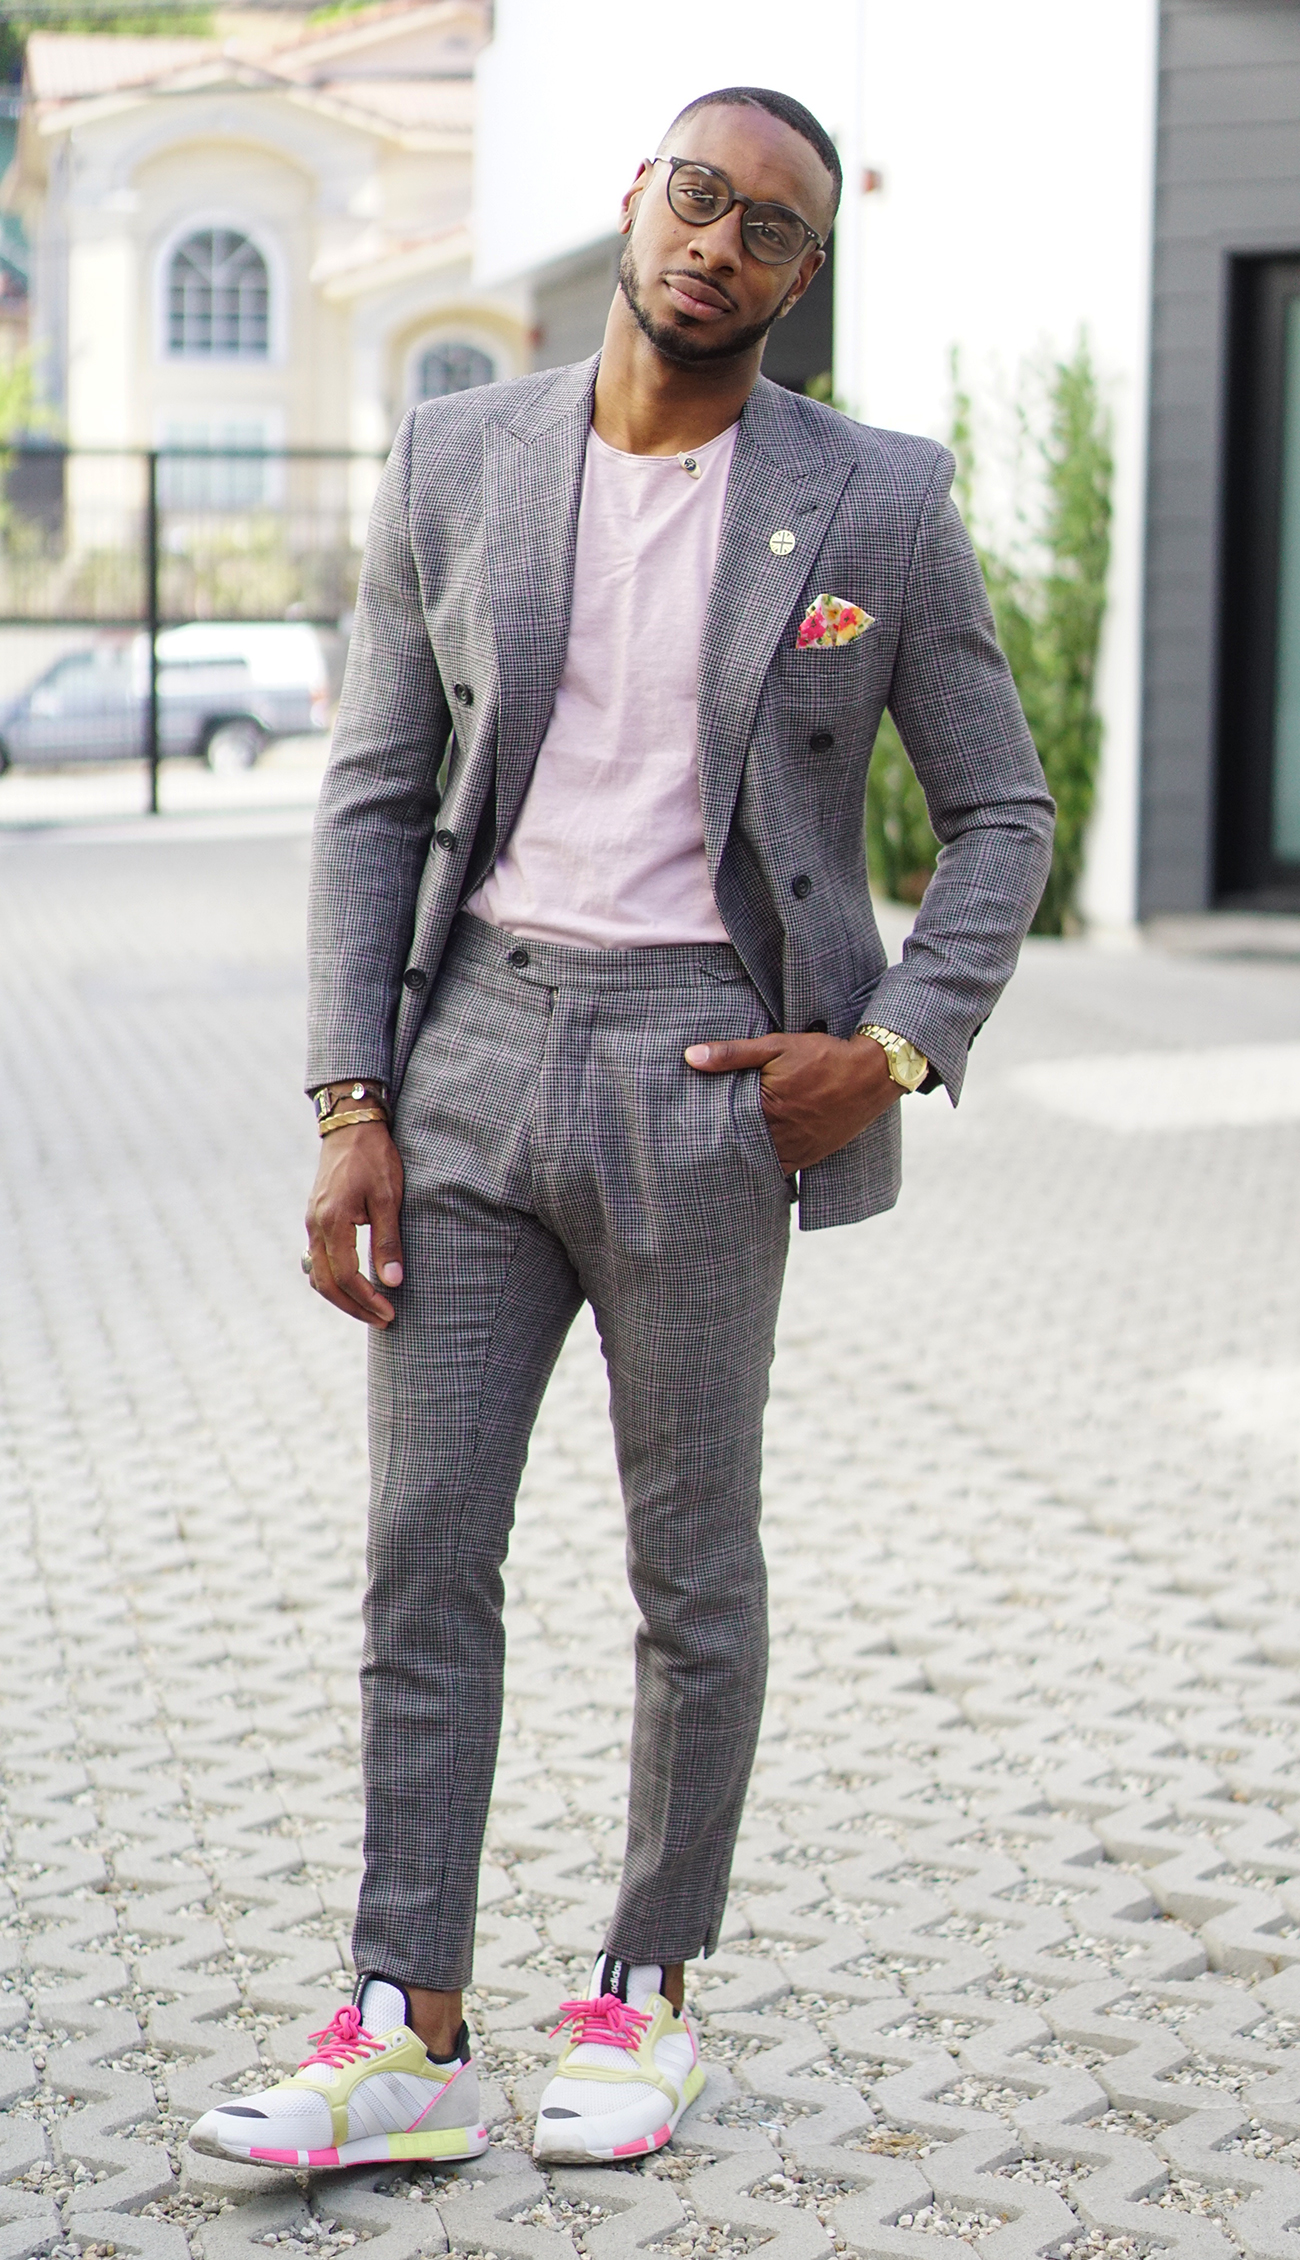 dress shirt and sneakers